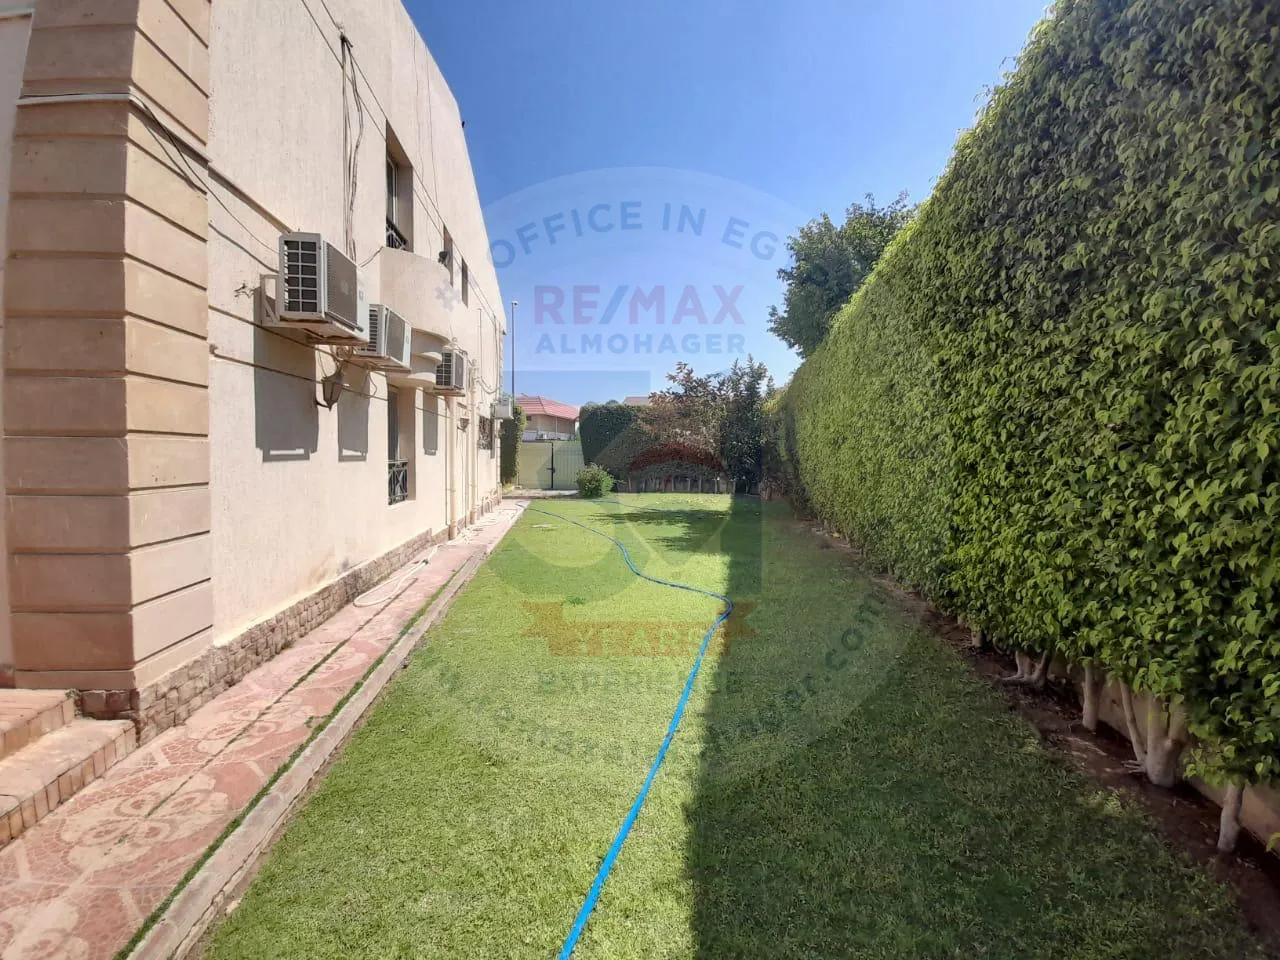 For sale Twin House in Rabwah Sheikh Zayed in a prime location - land area 542 meters